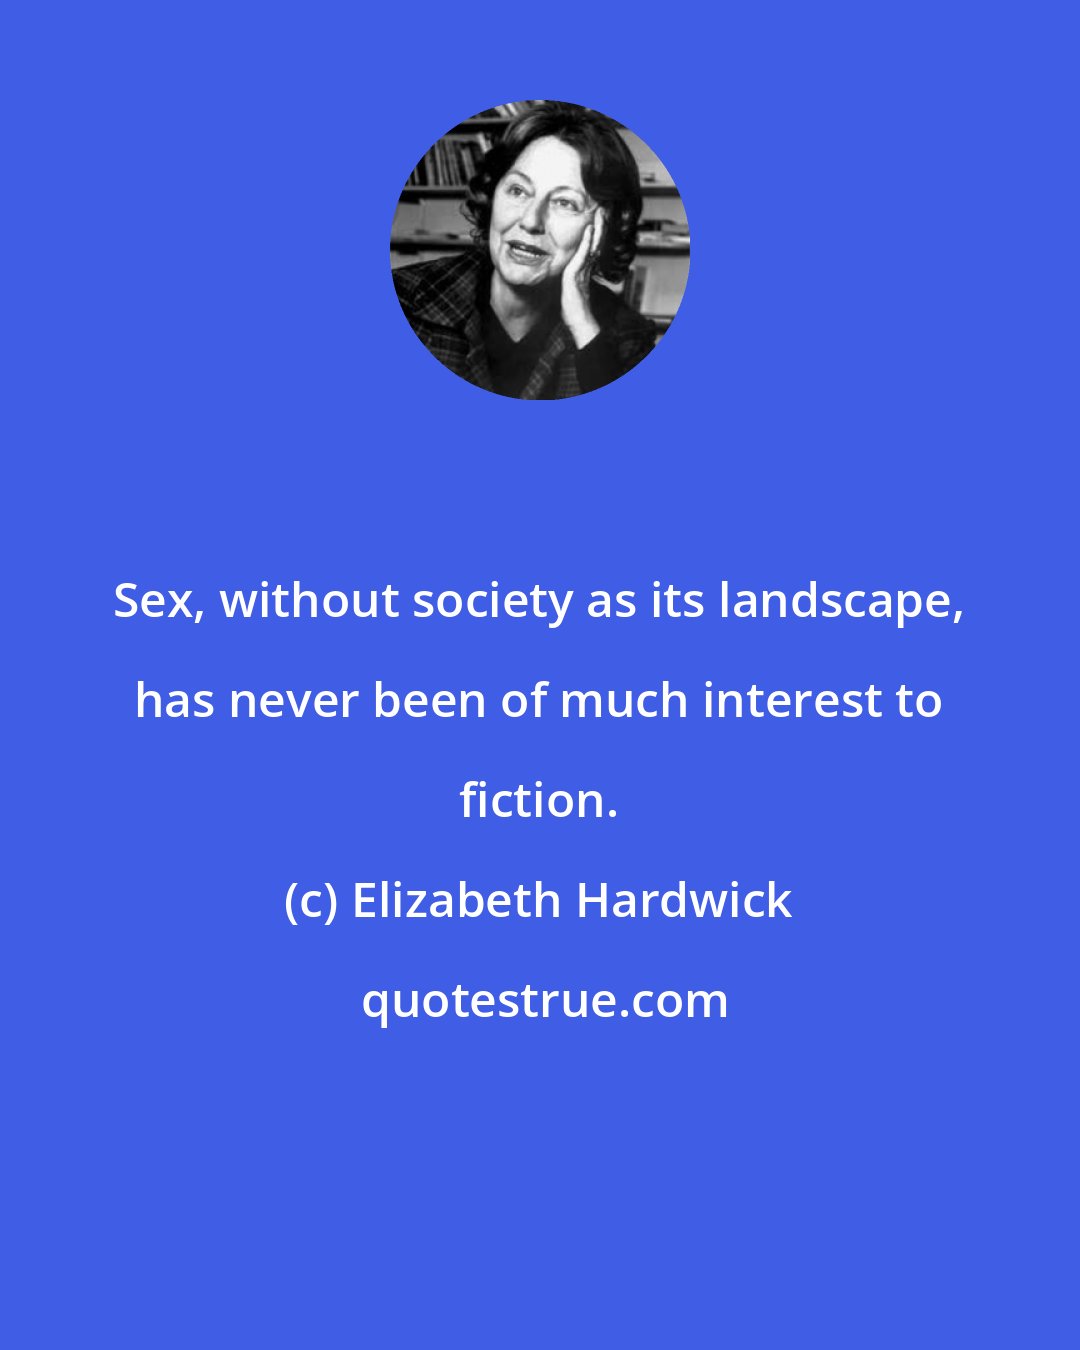 Elizabeth Hardwick: Sex, without society as its landscape, has never been of much interest to fiction.